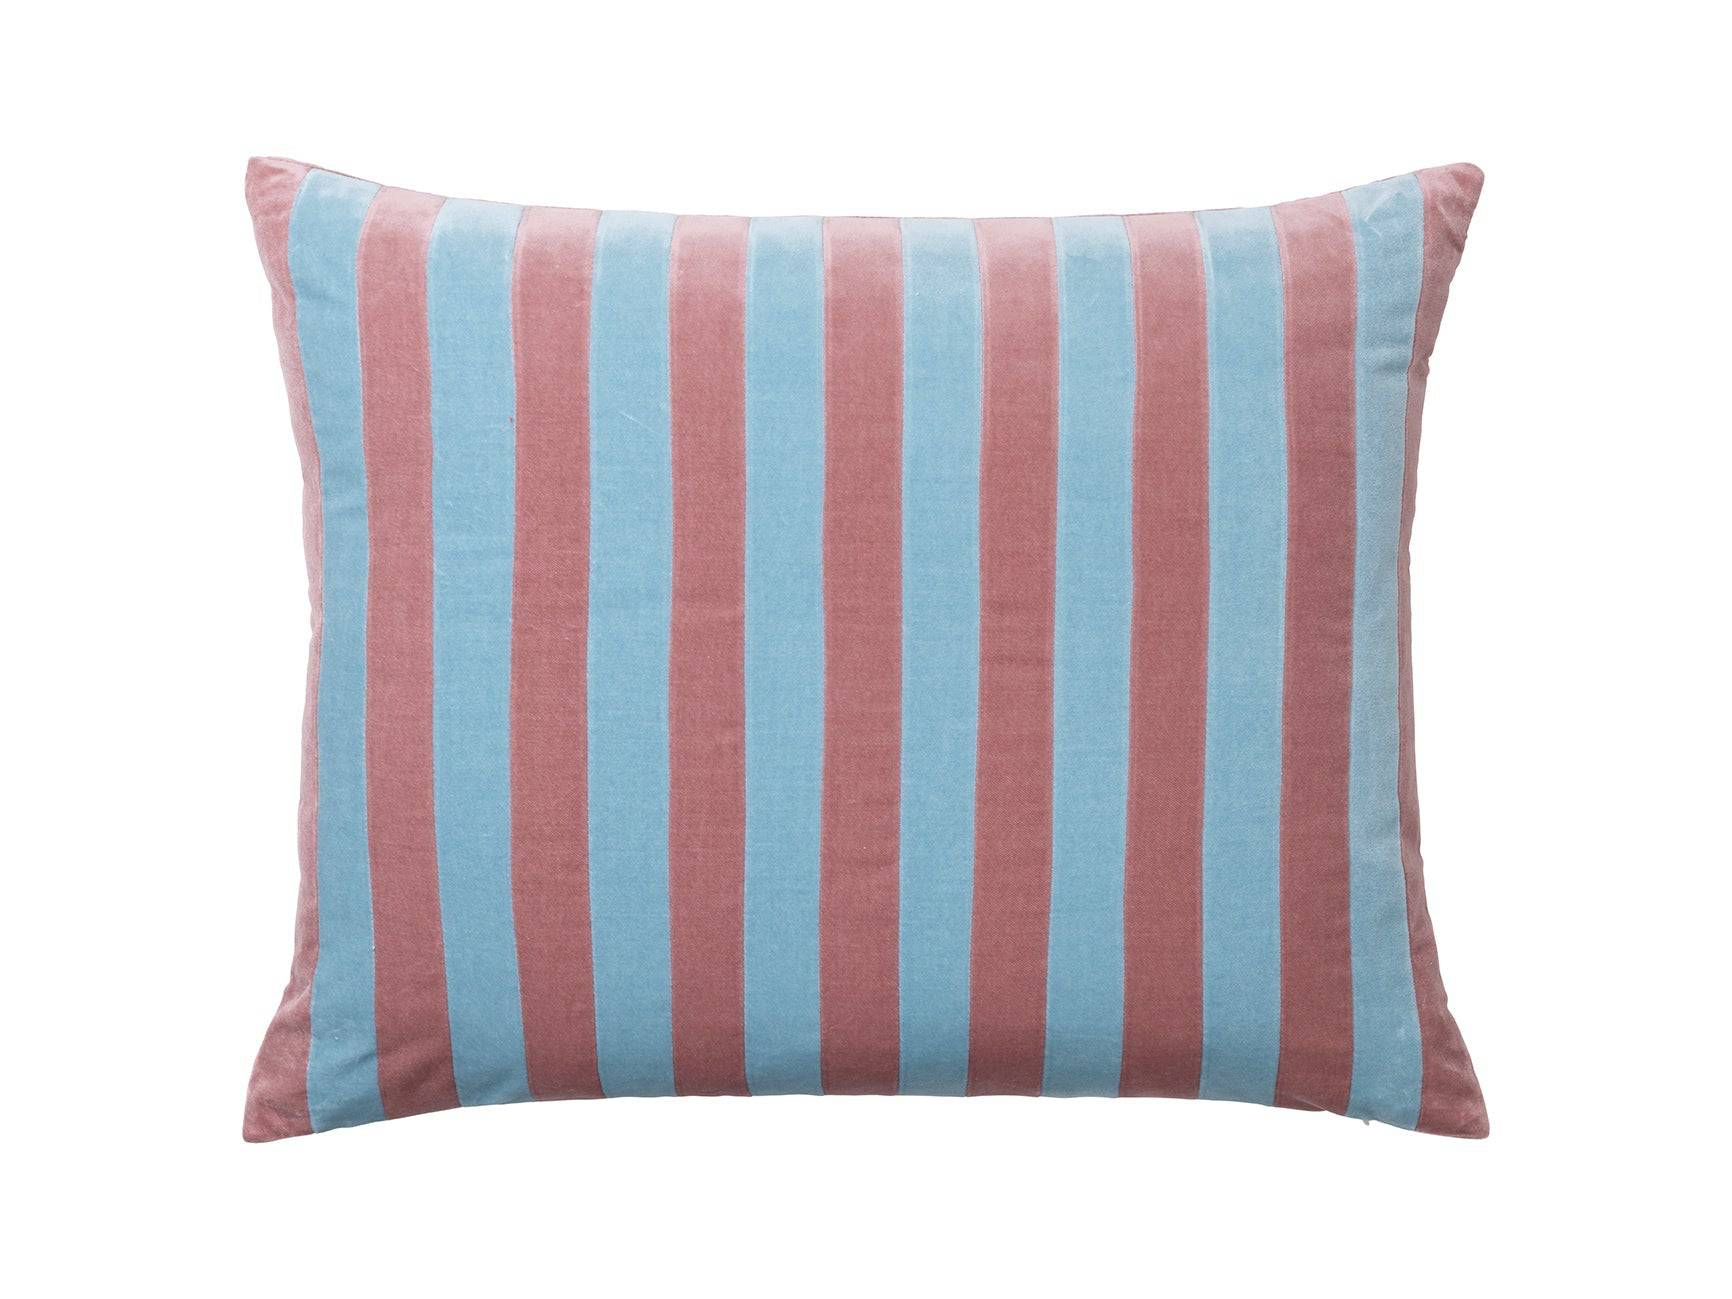 Millie Cushion - Old Rose & Blue Dust - THAT COOL LIVING